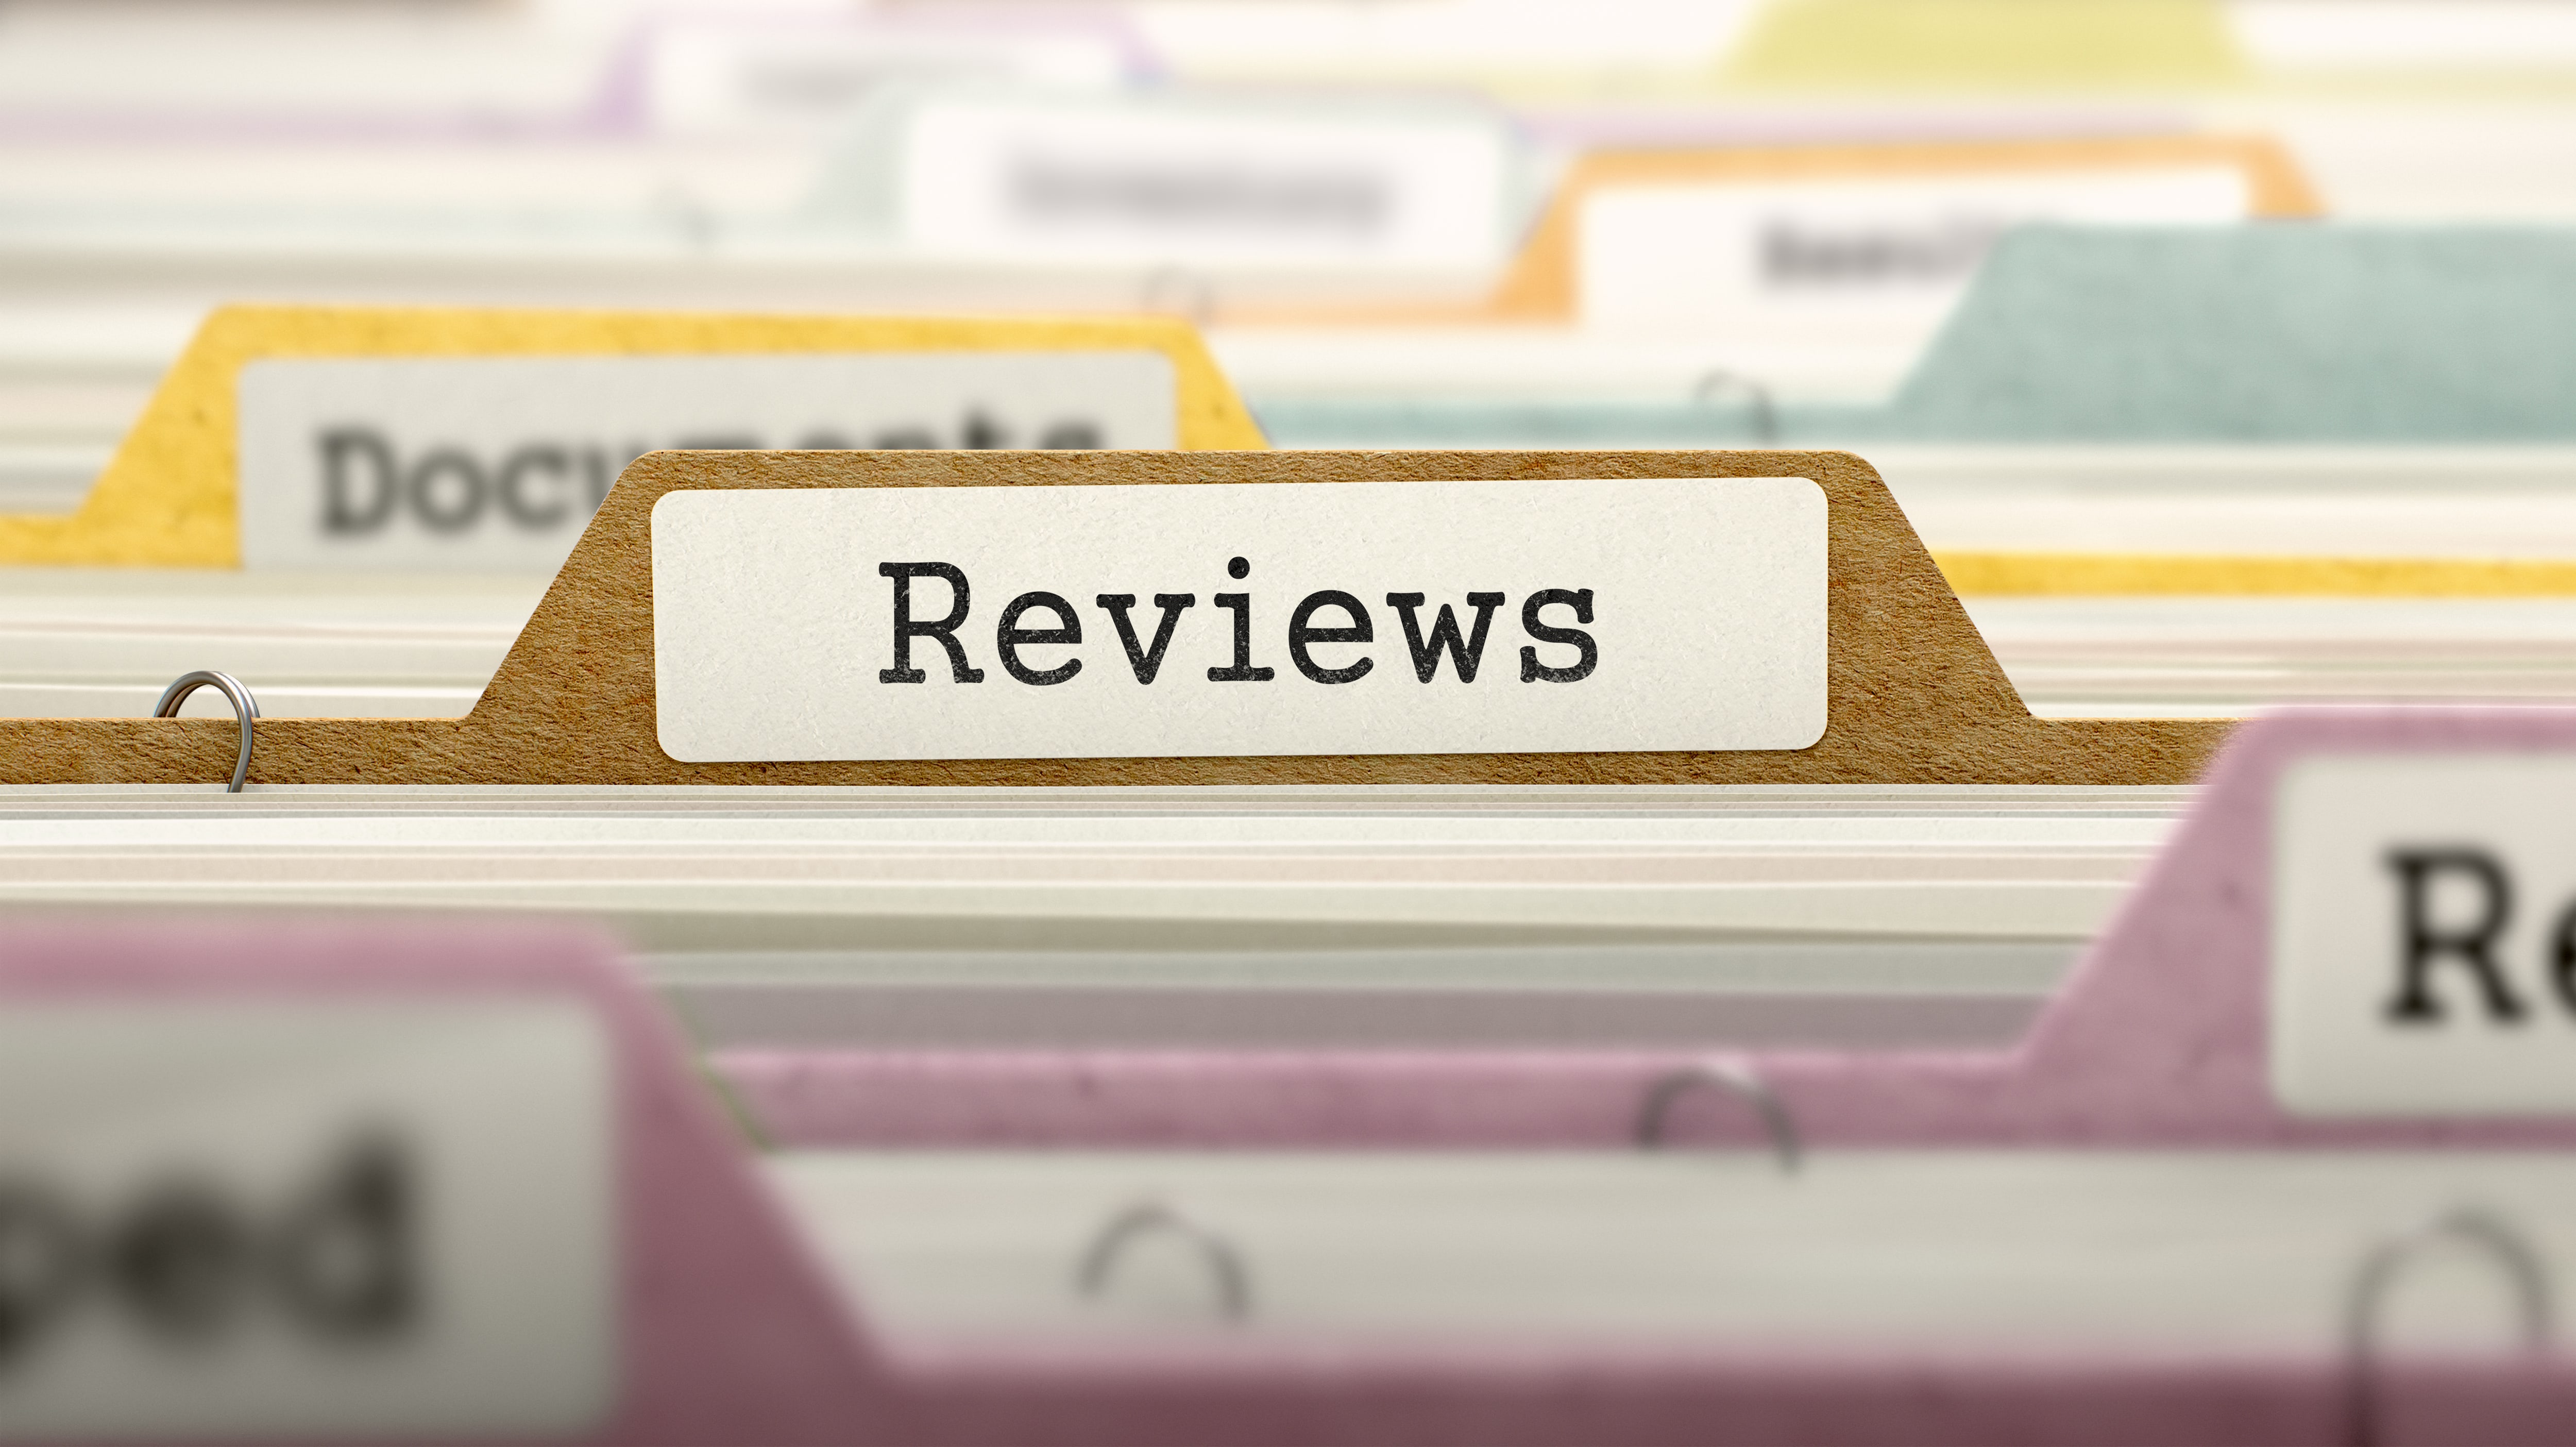 Performance review content can help you develop your new resume